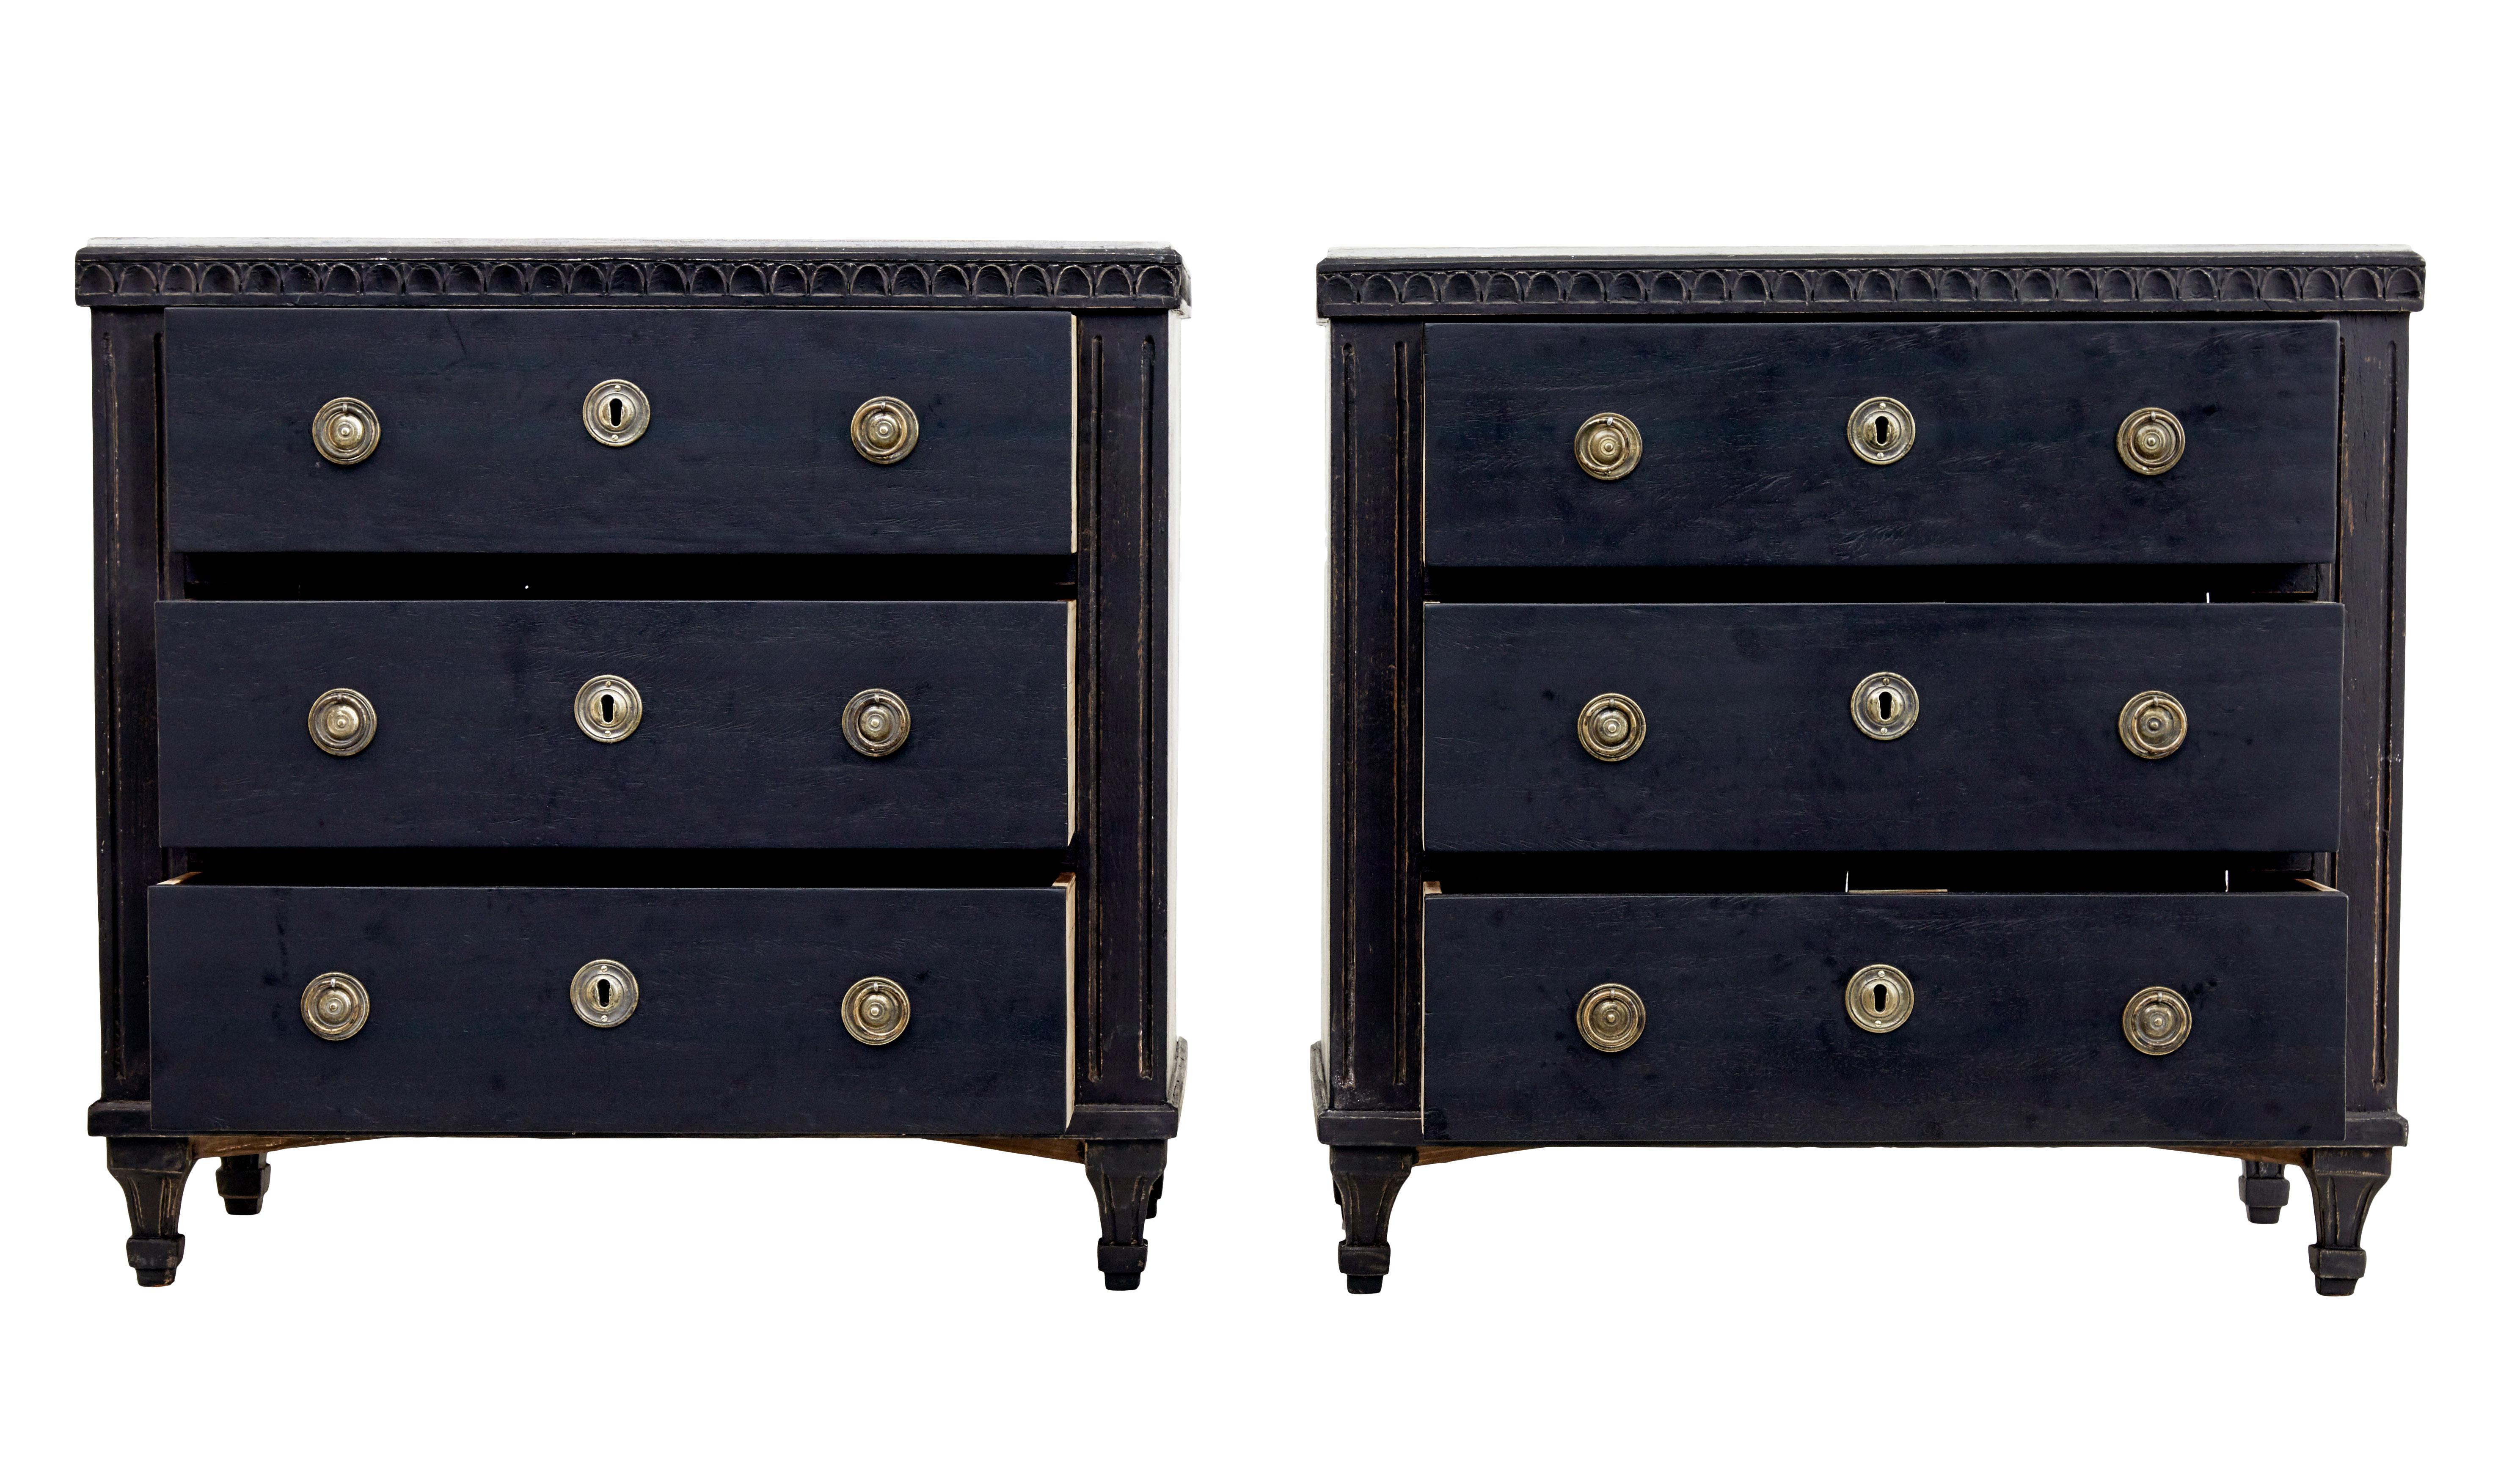 19th century pair of black painted Swedish commodes, circa 1870.

Fine quality pair of 3-drawer chests. Faux marble hand painted top surface, with detailed edged frieze. Oak lined drawers with working locks and key. Later handles and